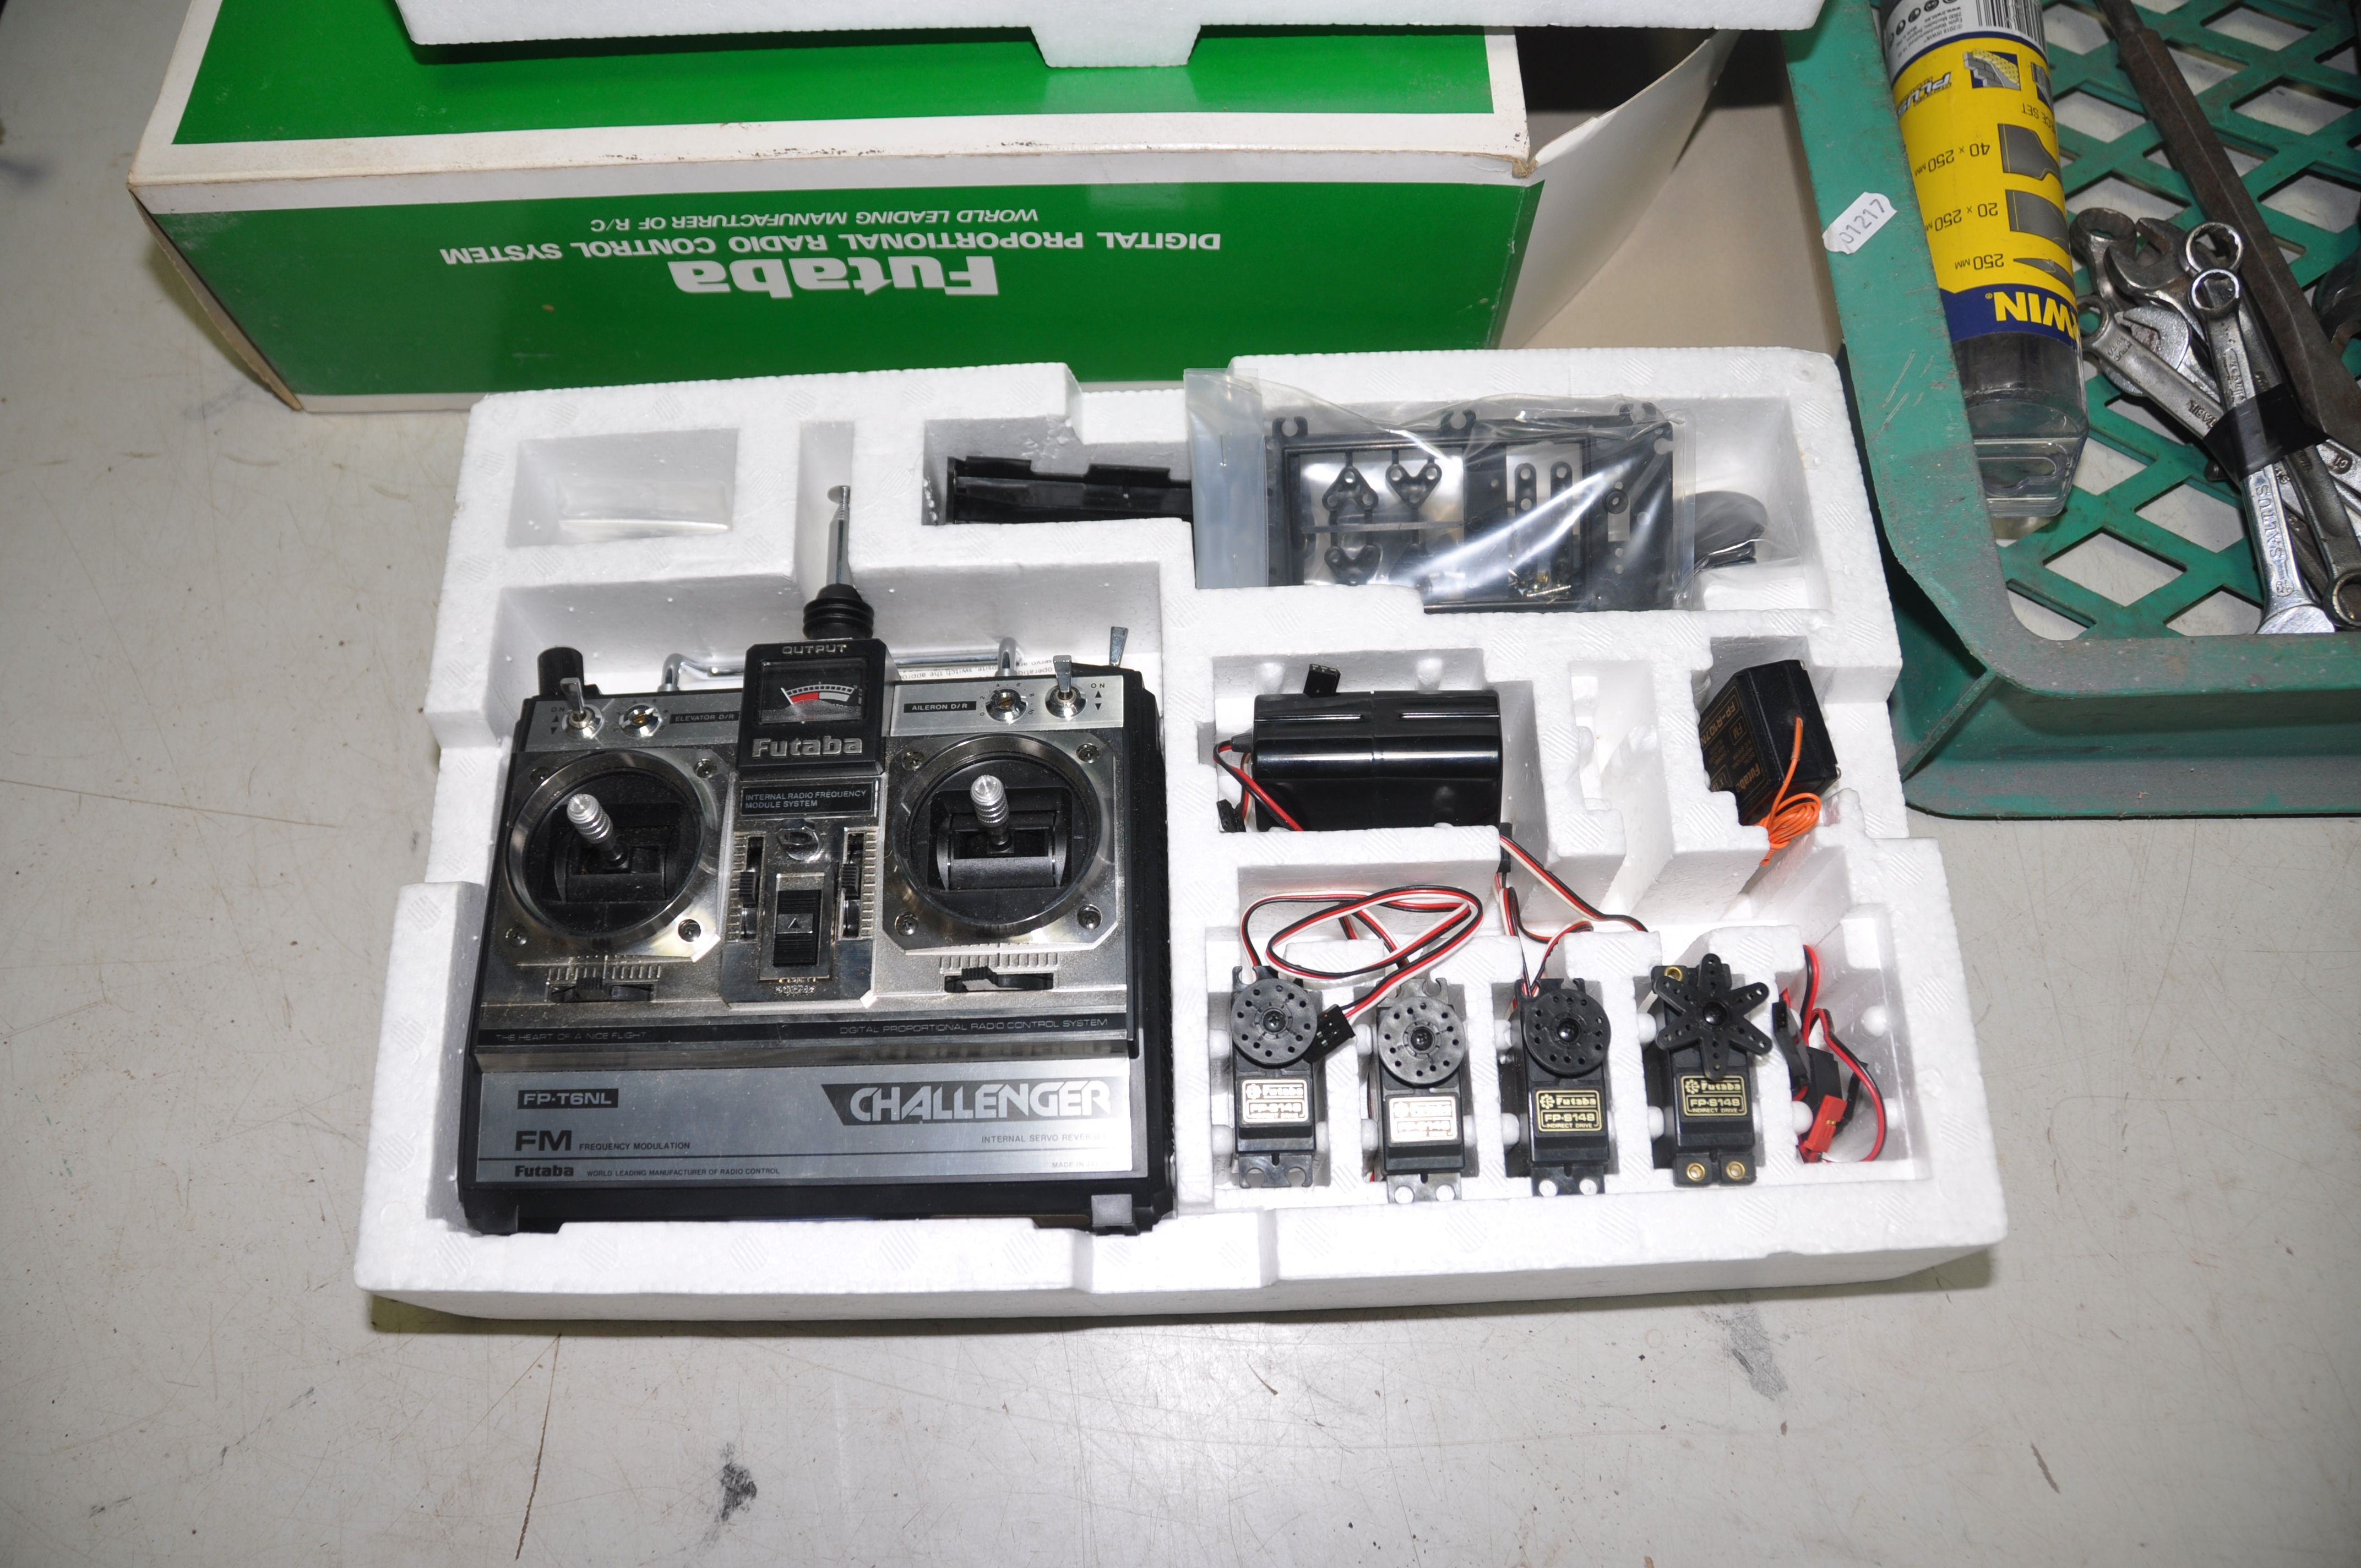 A FUTABA FP-T6NL CHALLENGER DIGITAL RADIO CONTROL SYSTEM in original box all parts and spares appear - Image 3 of 8